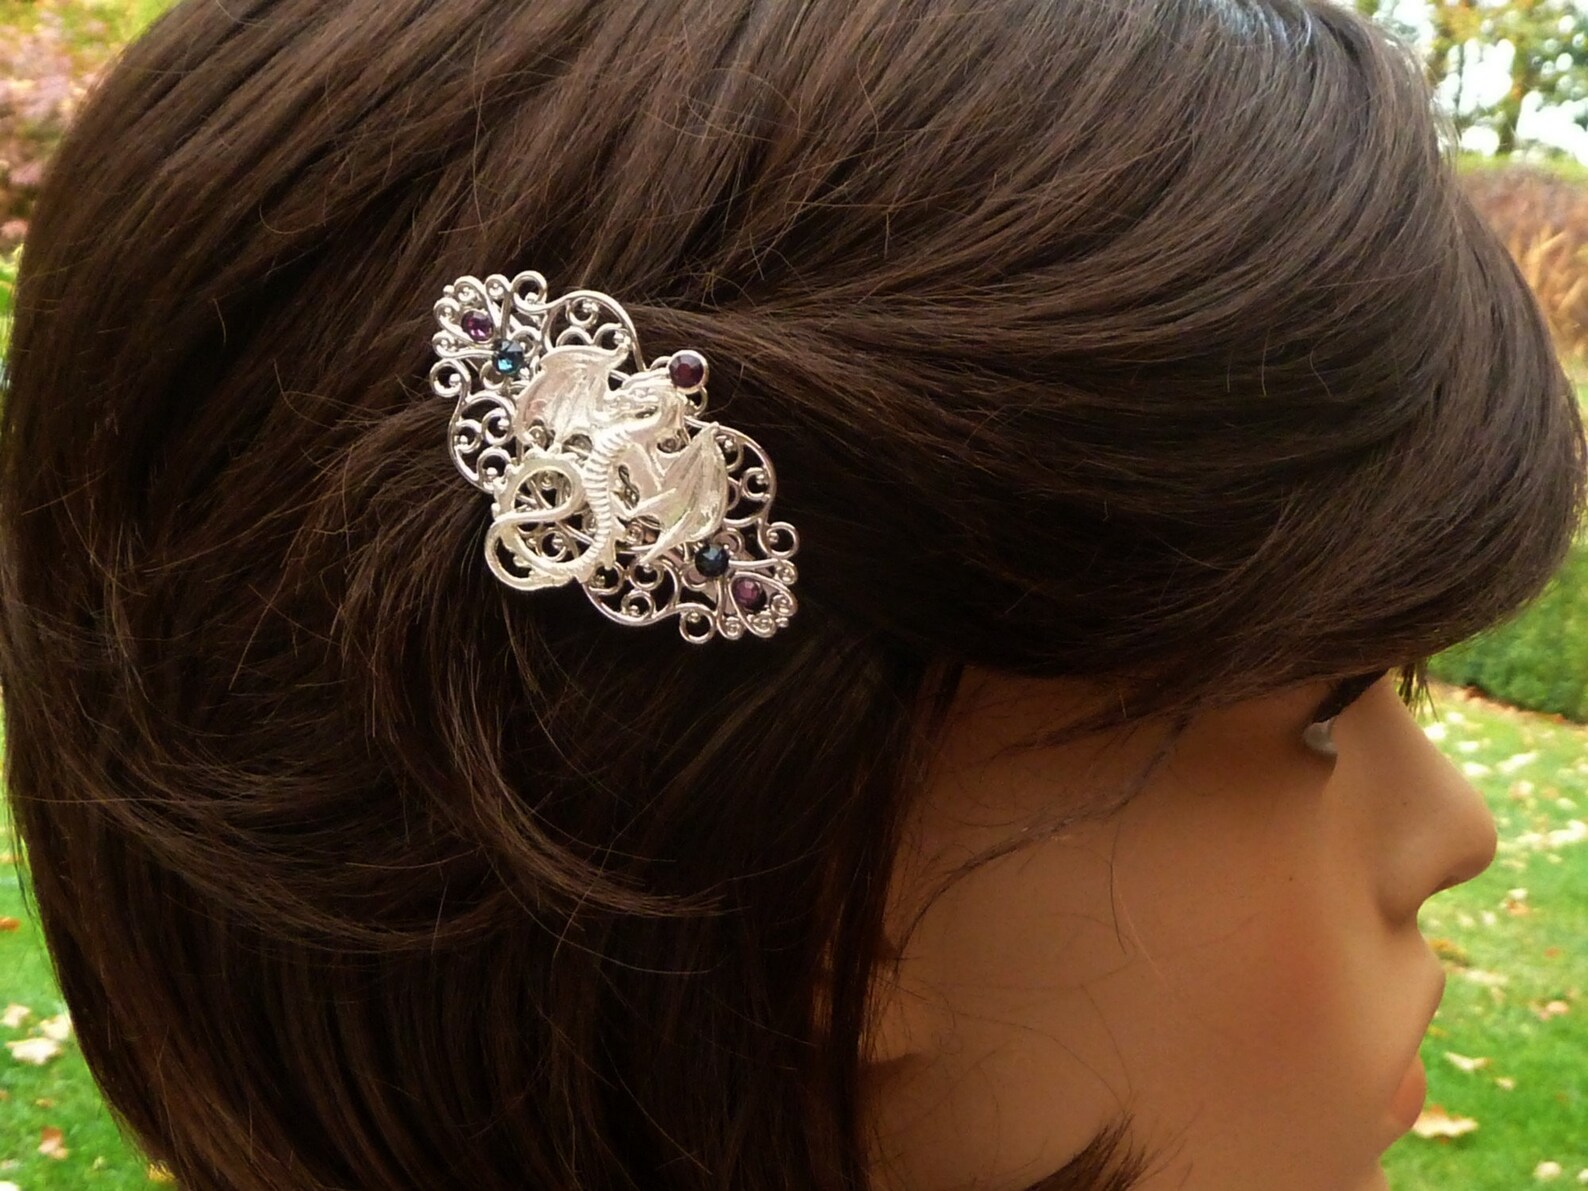 Little Dragon Hair Clip in Silver Medieval Hair Jewelry - Etsy